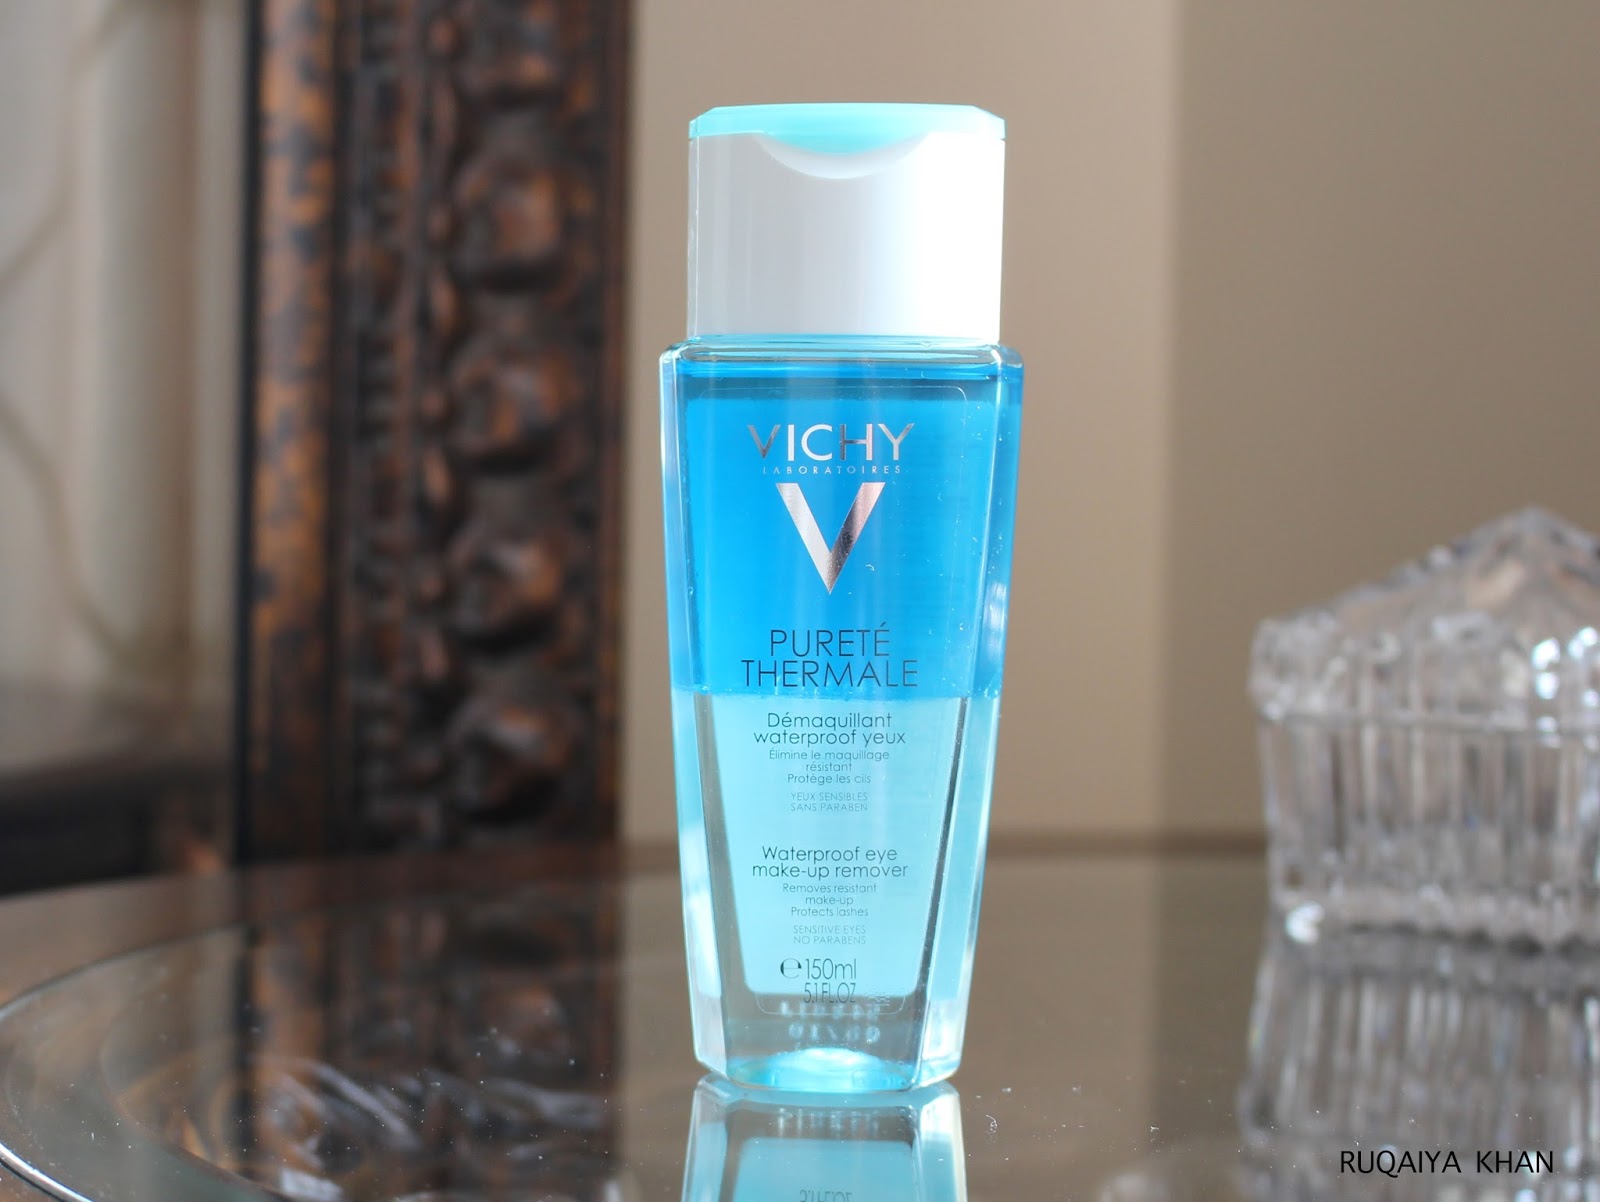 VICHY PURETÉ THERMALE Waterproof Eye Makeup Remover Review